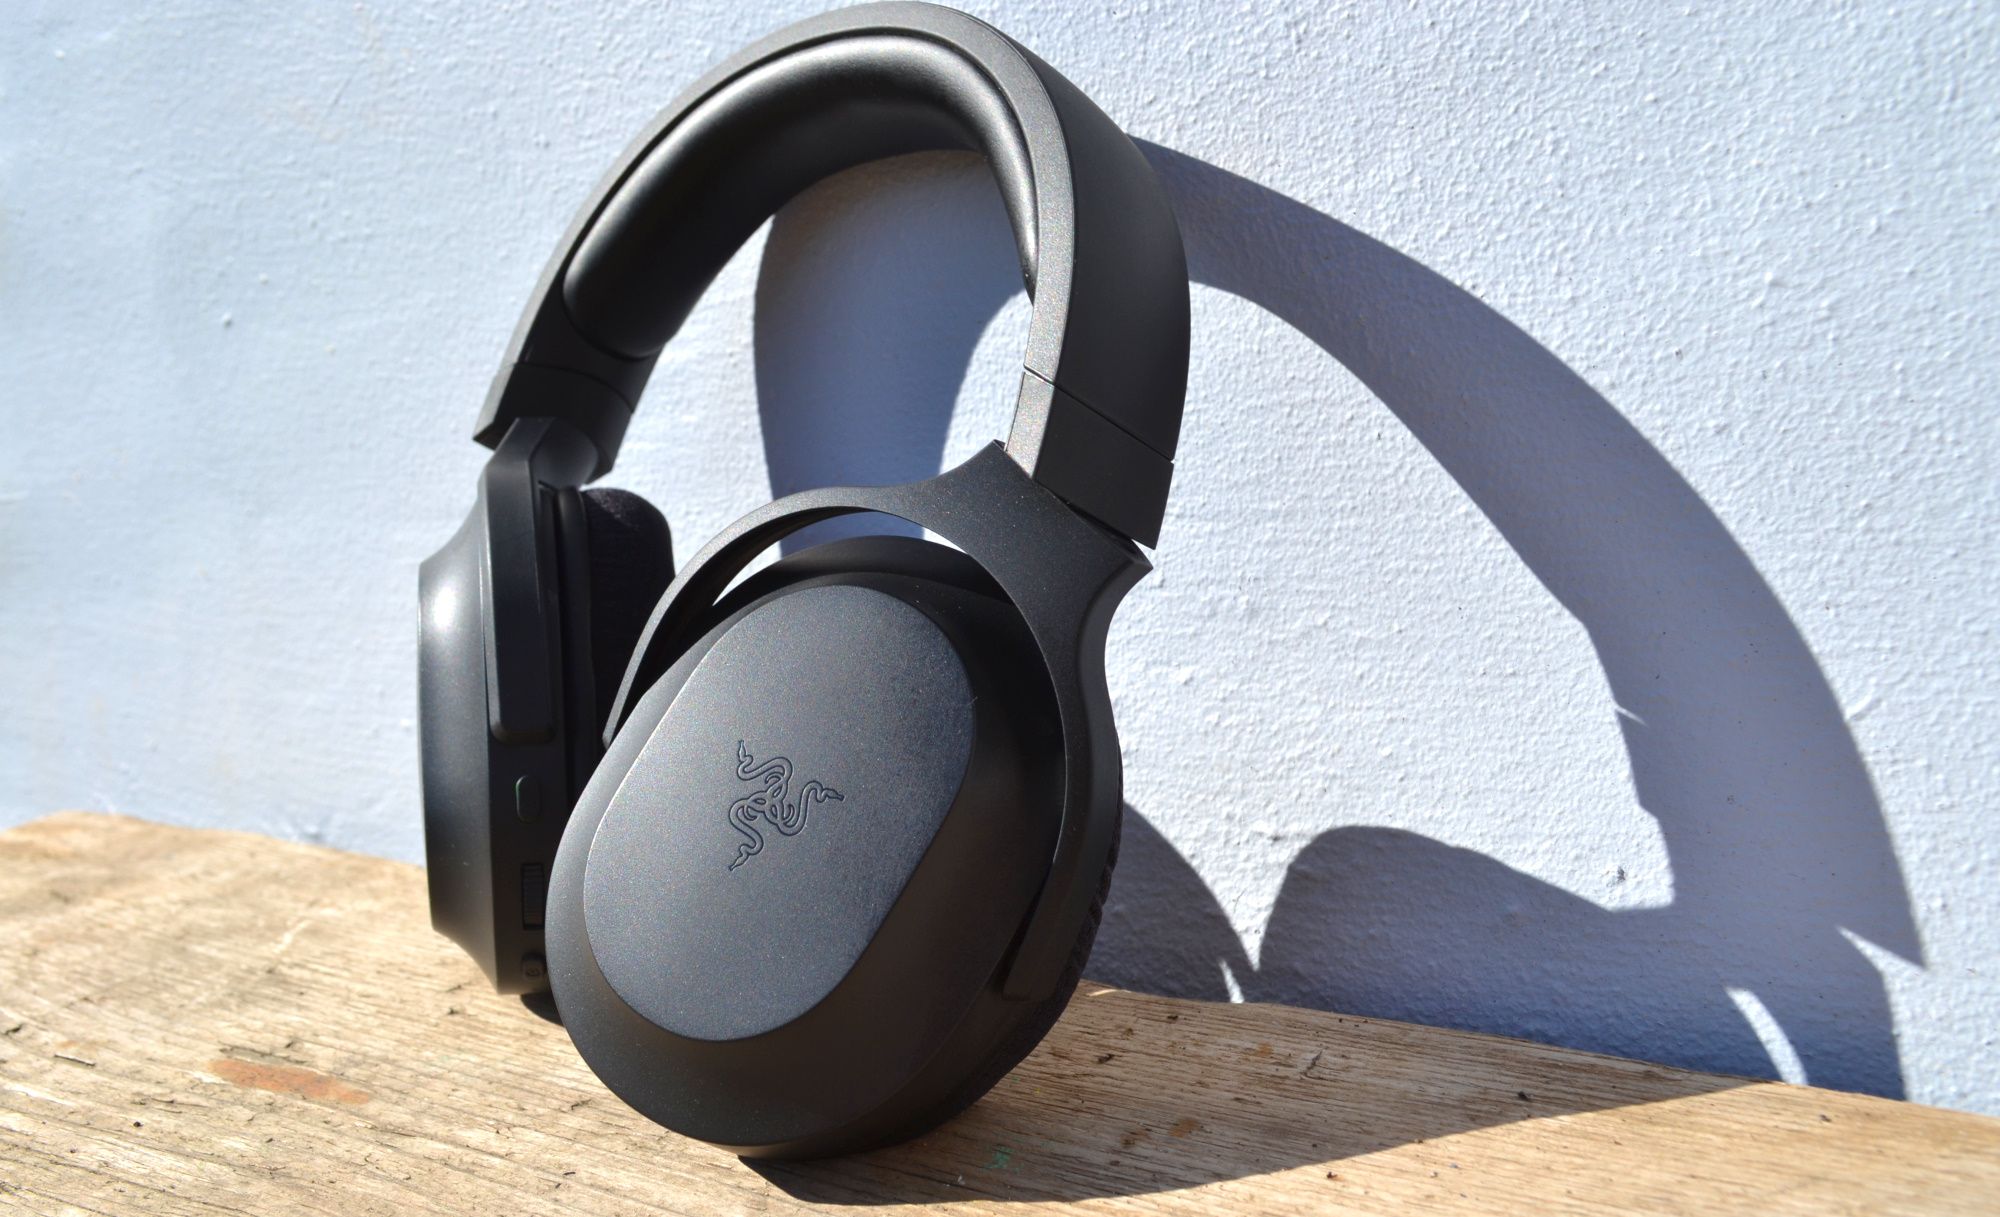 Razer Barracuda review: Take this sleek gaming headset with you